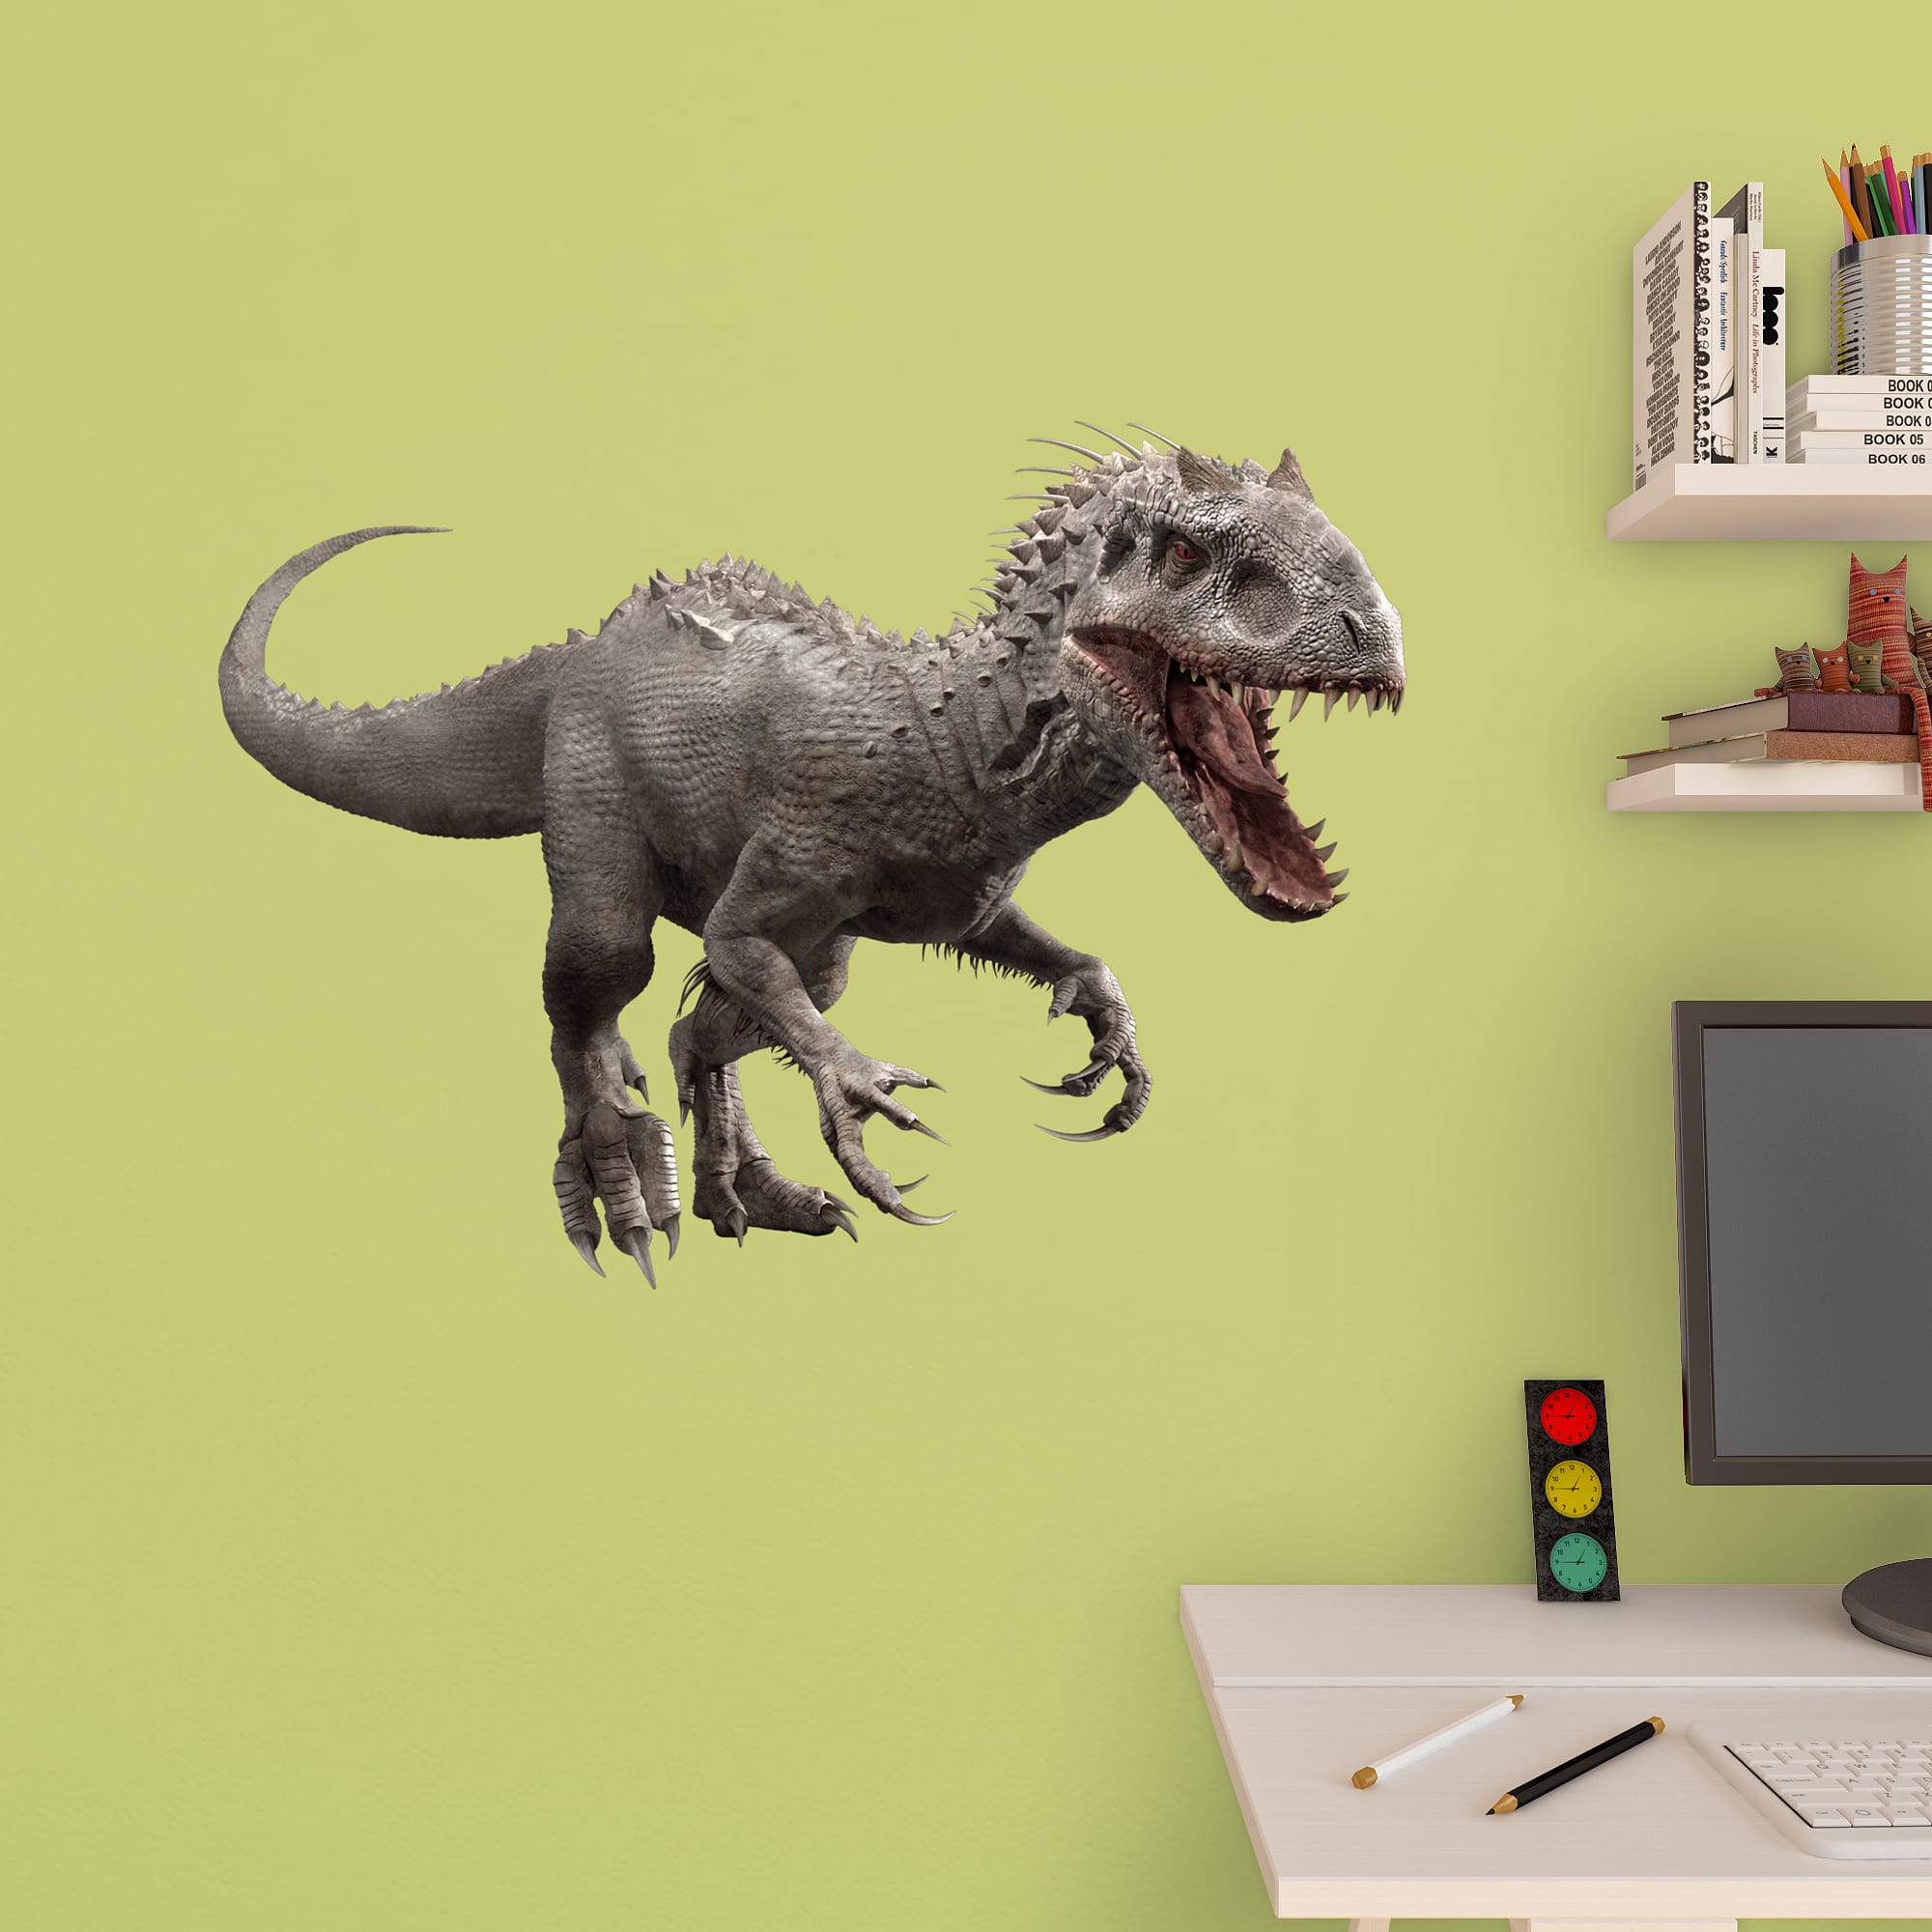 Indominus Rex: Jurassic World - Officially Licensed Removable Wall Decal 35.0"W x 24.0"H by Fathead | Vinyl